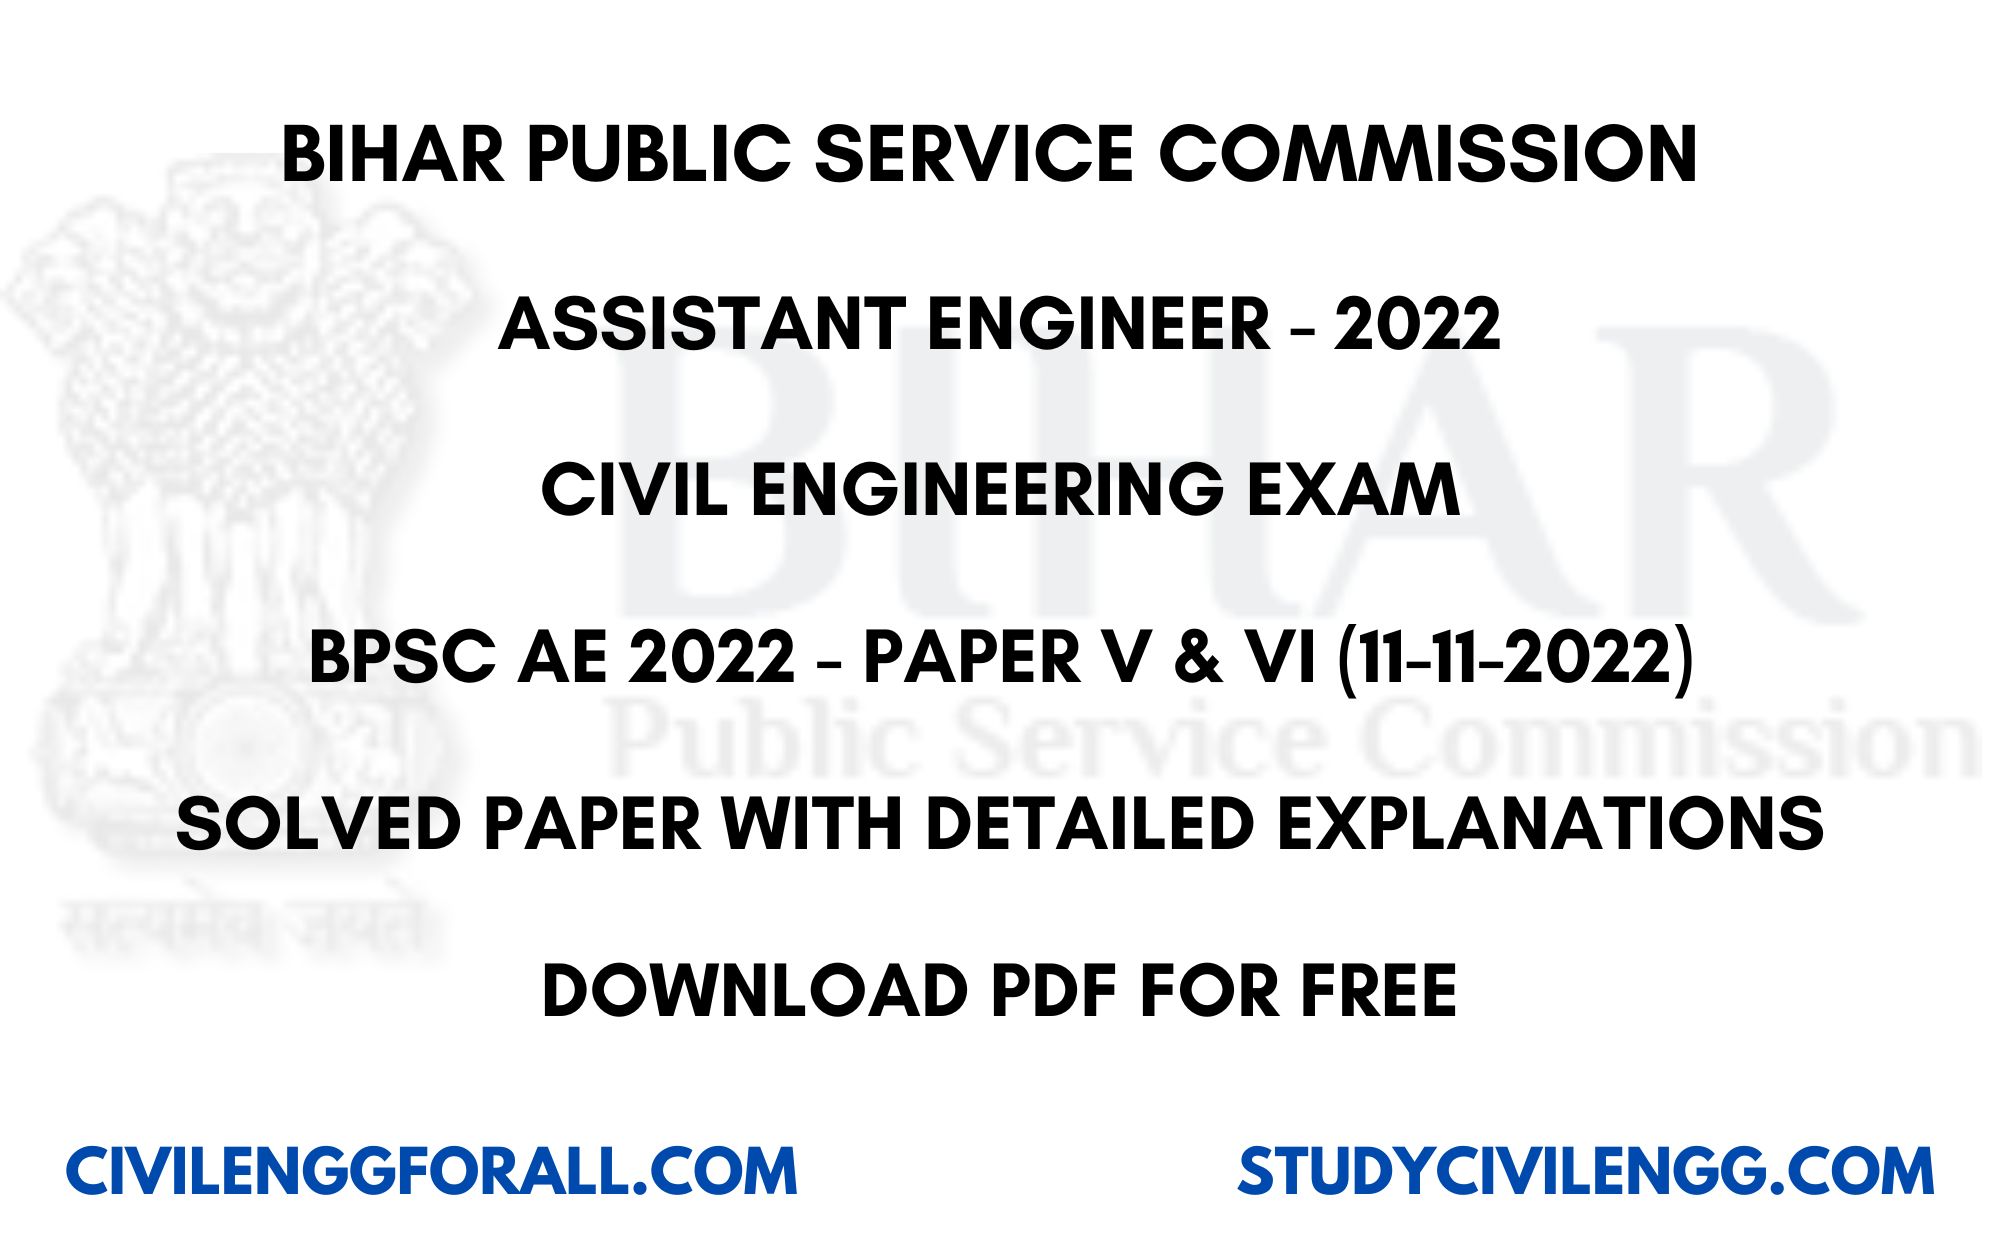 BPSC AE 2022 Civil Engineering Solved Paper